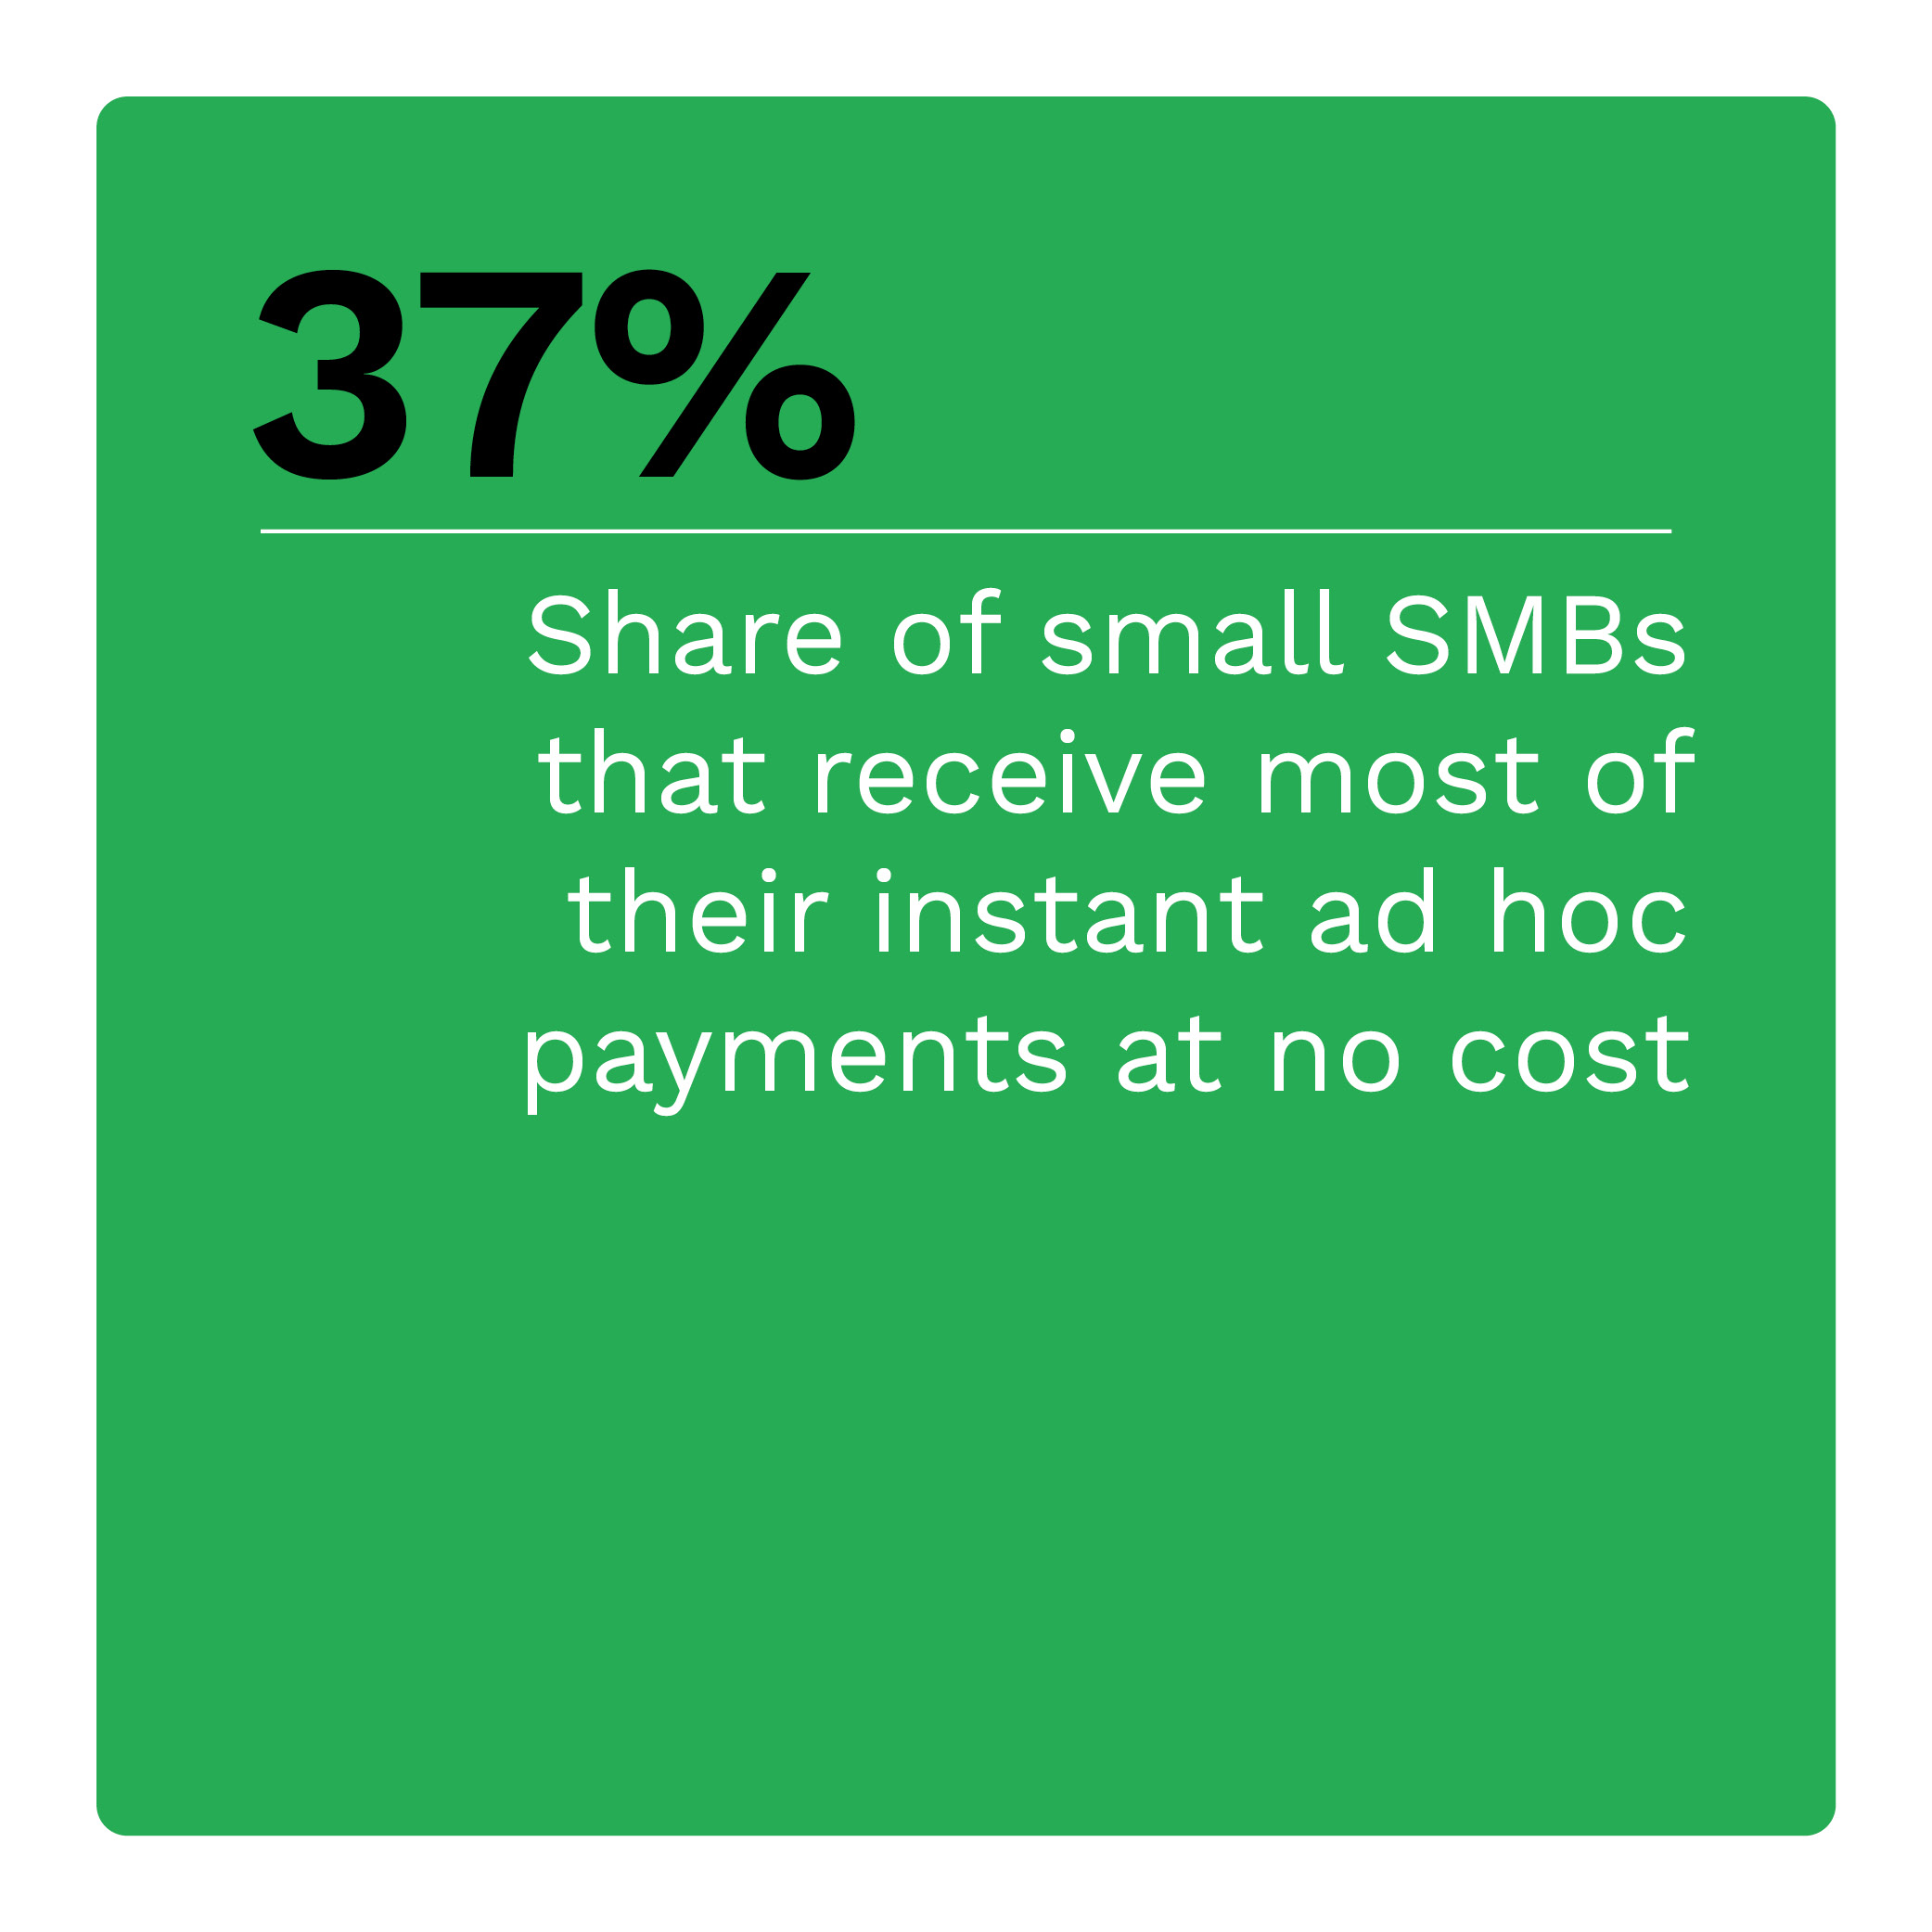 37%: Share of small SMBs that receive most of their instant ad hoc payments at no cost